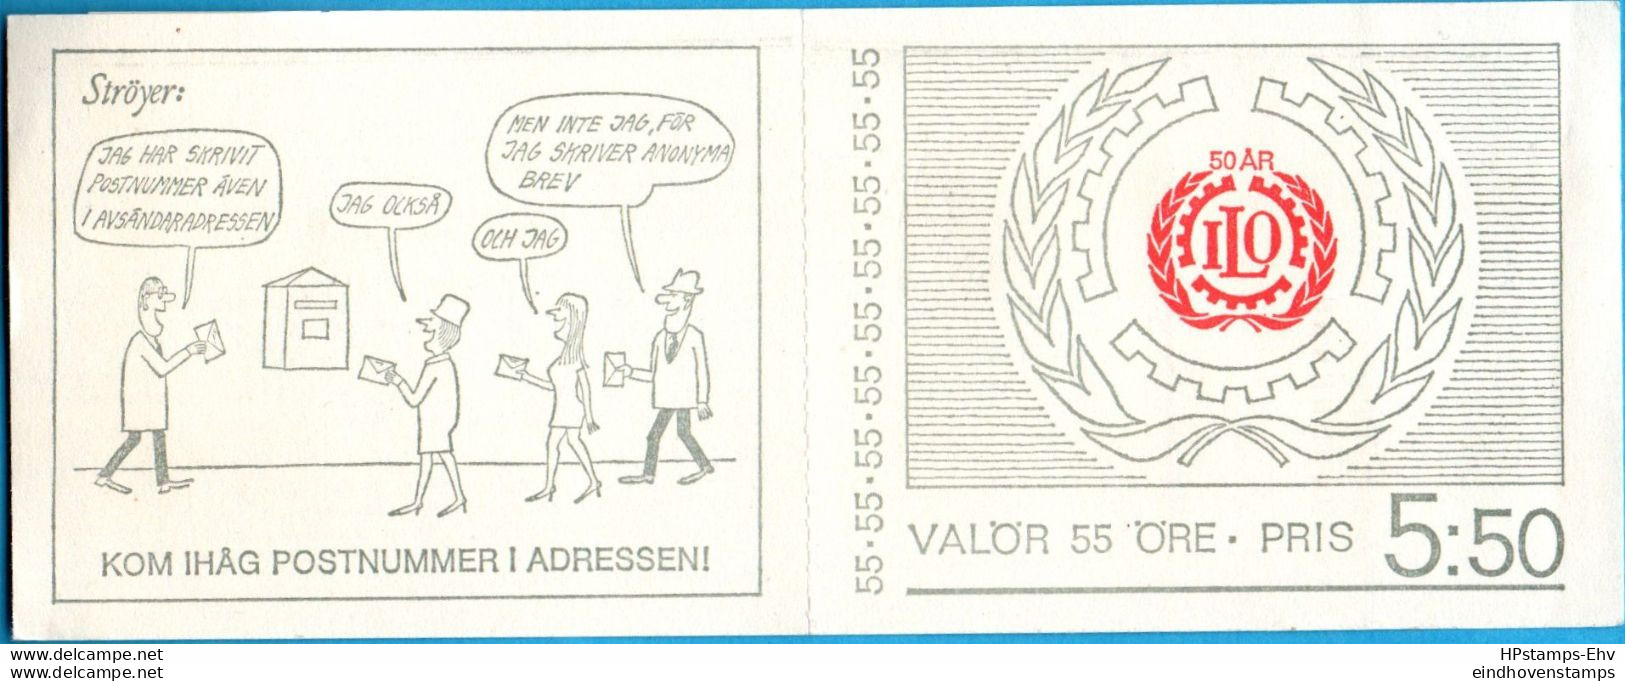 Sweden 1969 ILO Symbol On Stamp Booklet With 10 Stamps Featuring An Industr Labourer MNH 69M632 - IAO